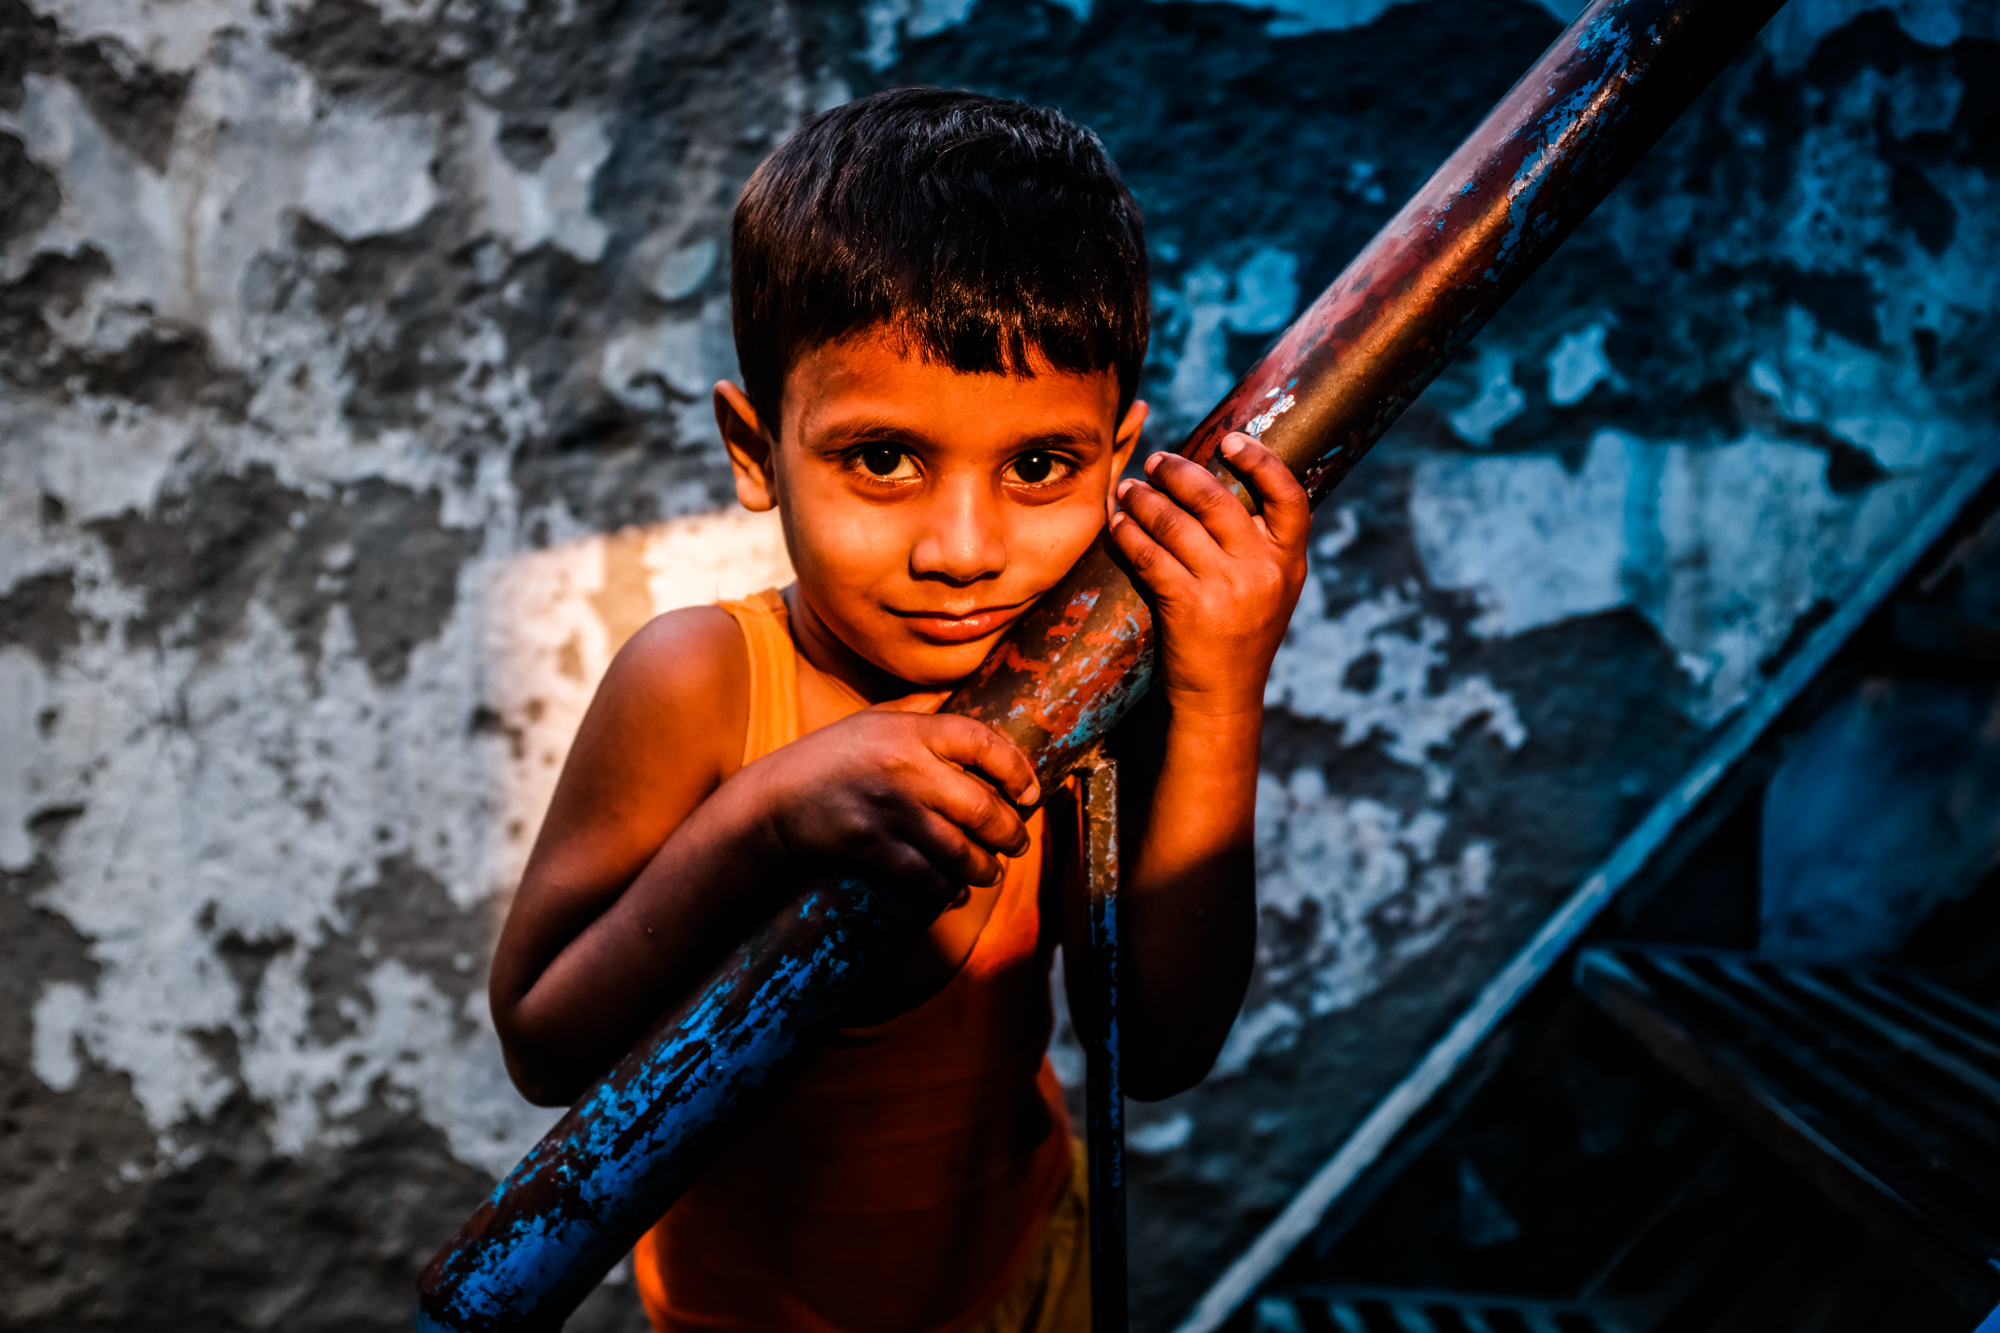 A portrait of an Indian boy in a back alley of Delhi, India at sunset